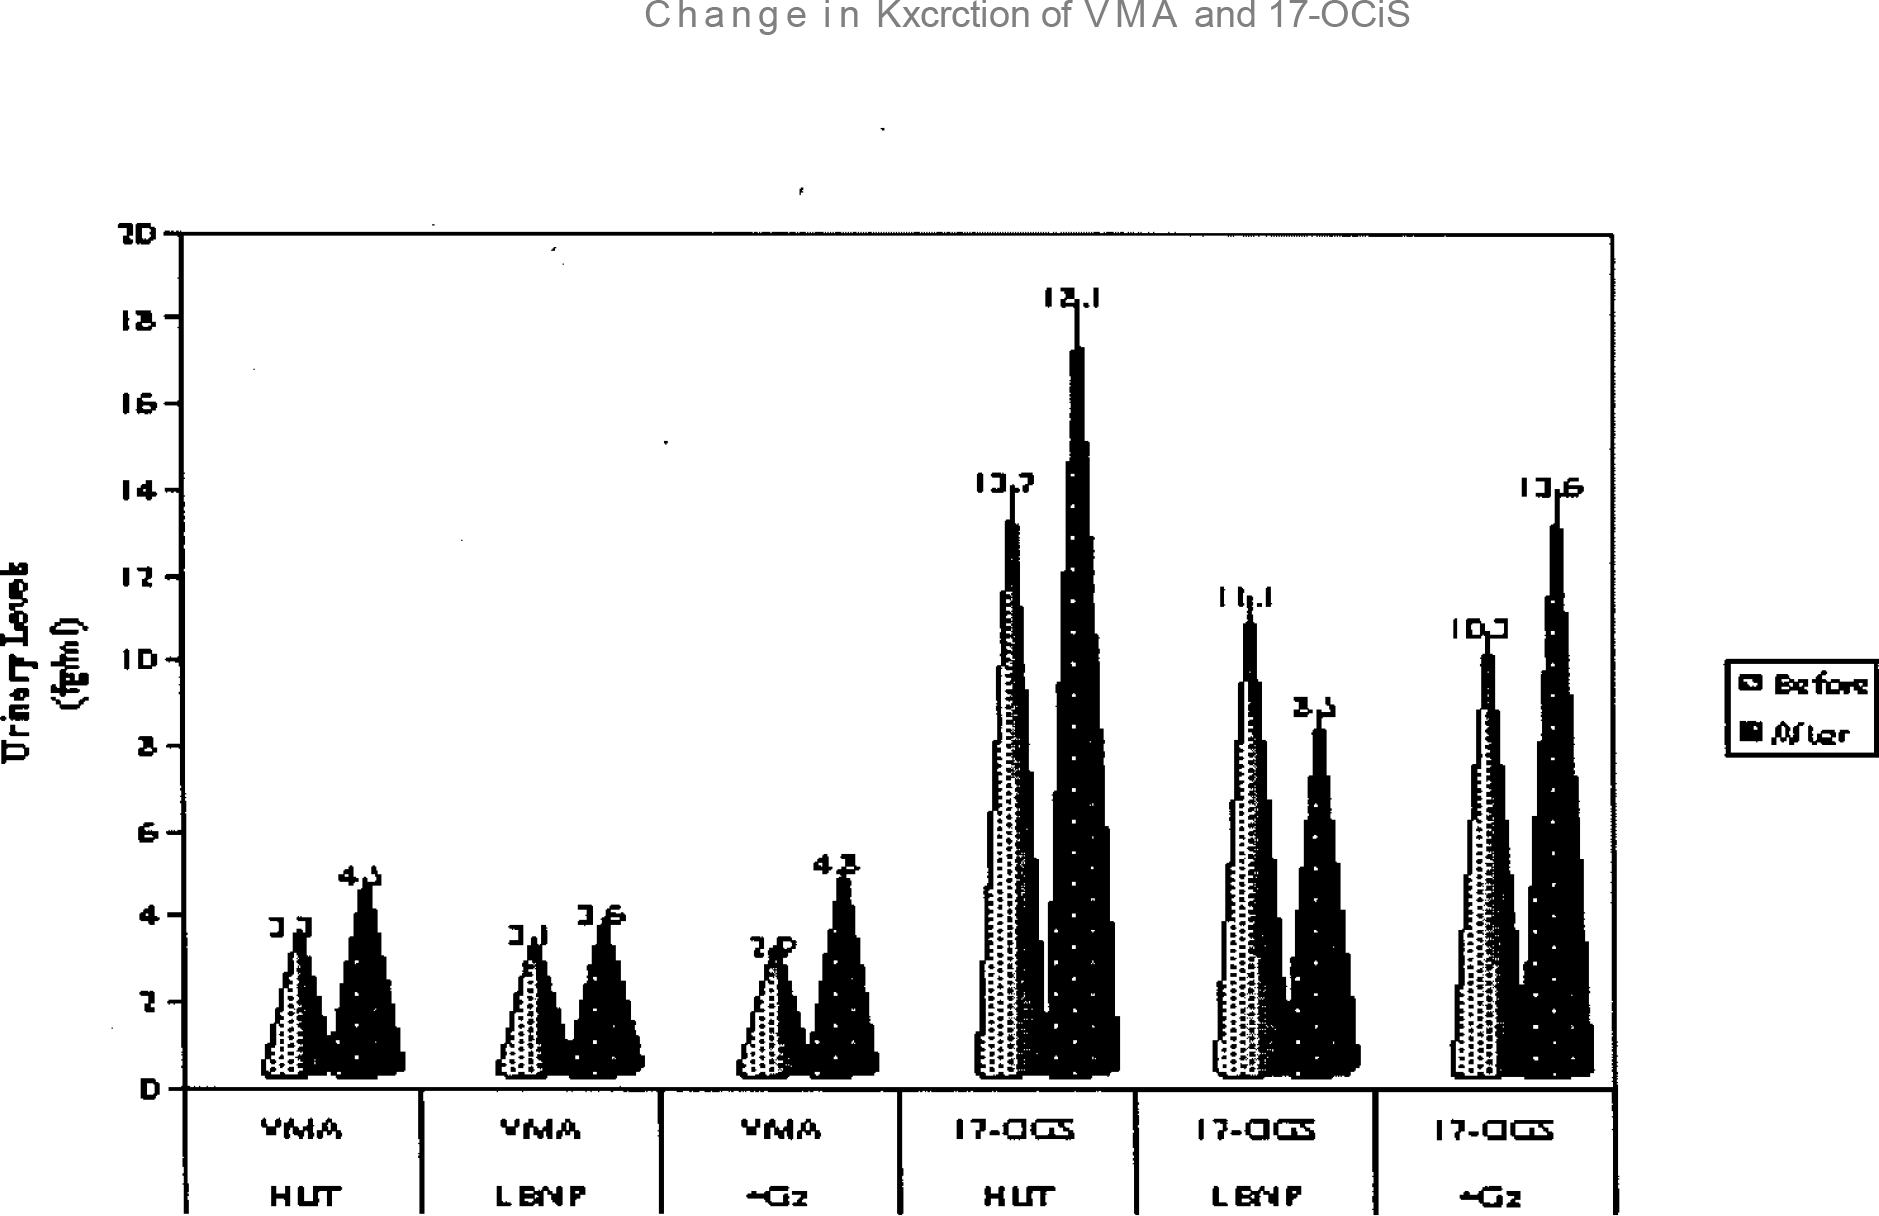 Shows the effect of exposure to HUT, LBNP and SACM on urinary levels of VMA and 17-OGS. Changes are significant 17-OGS during all three stresses (p<0.05) Change in VMA is also significant post- SACM (p<0.05).